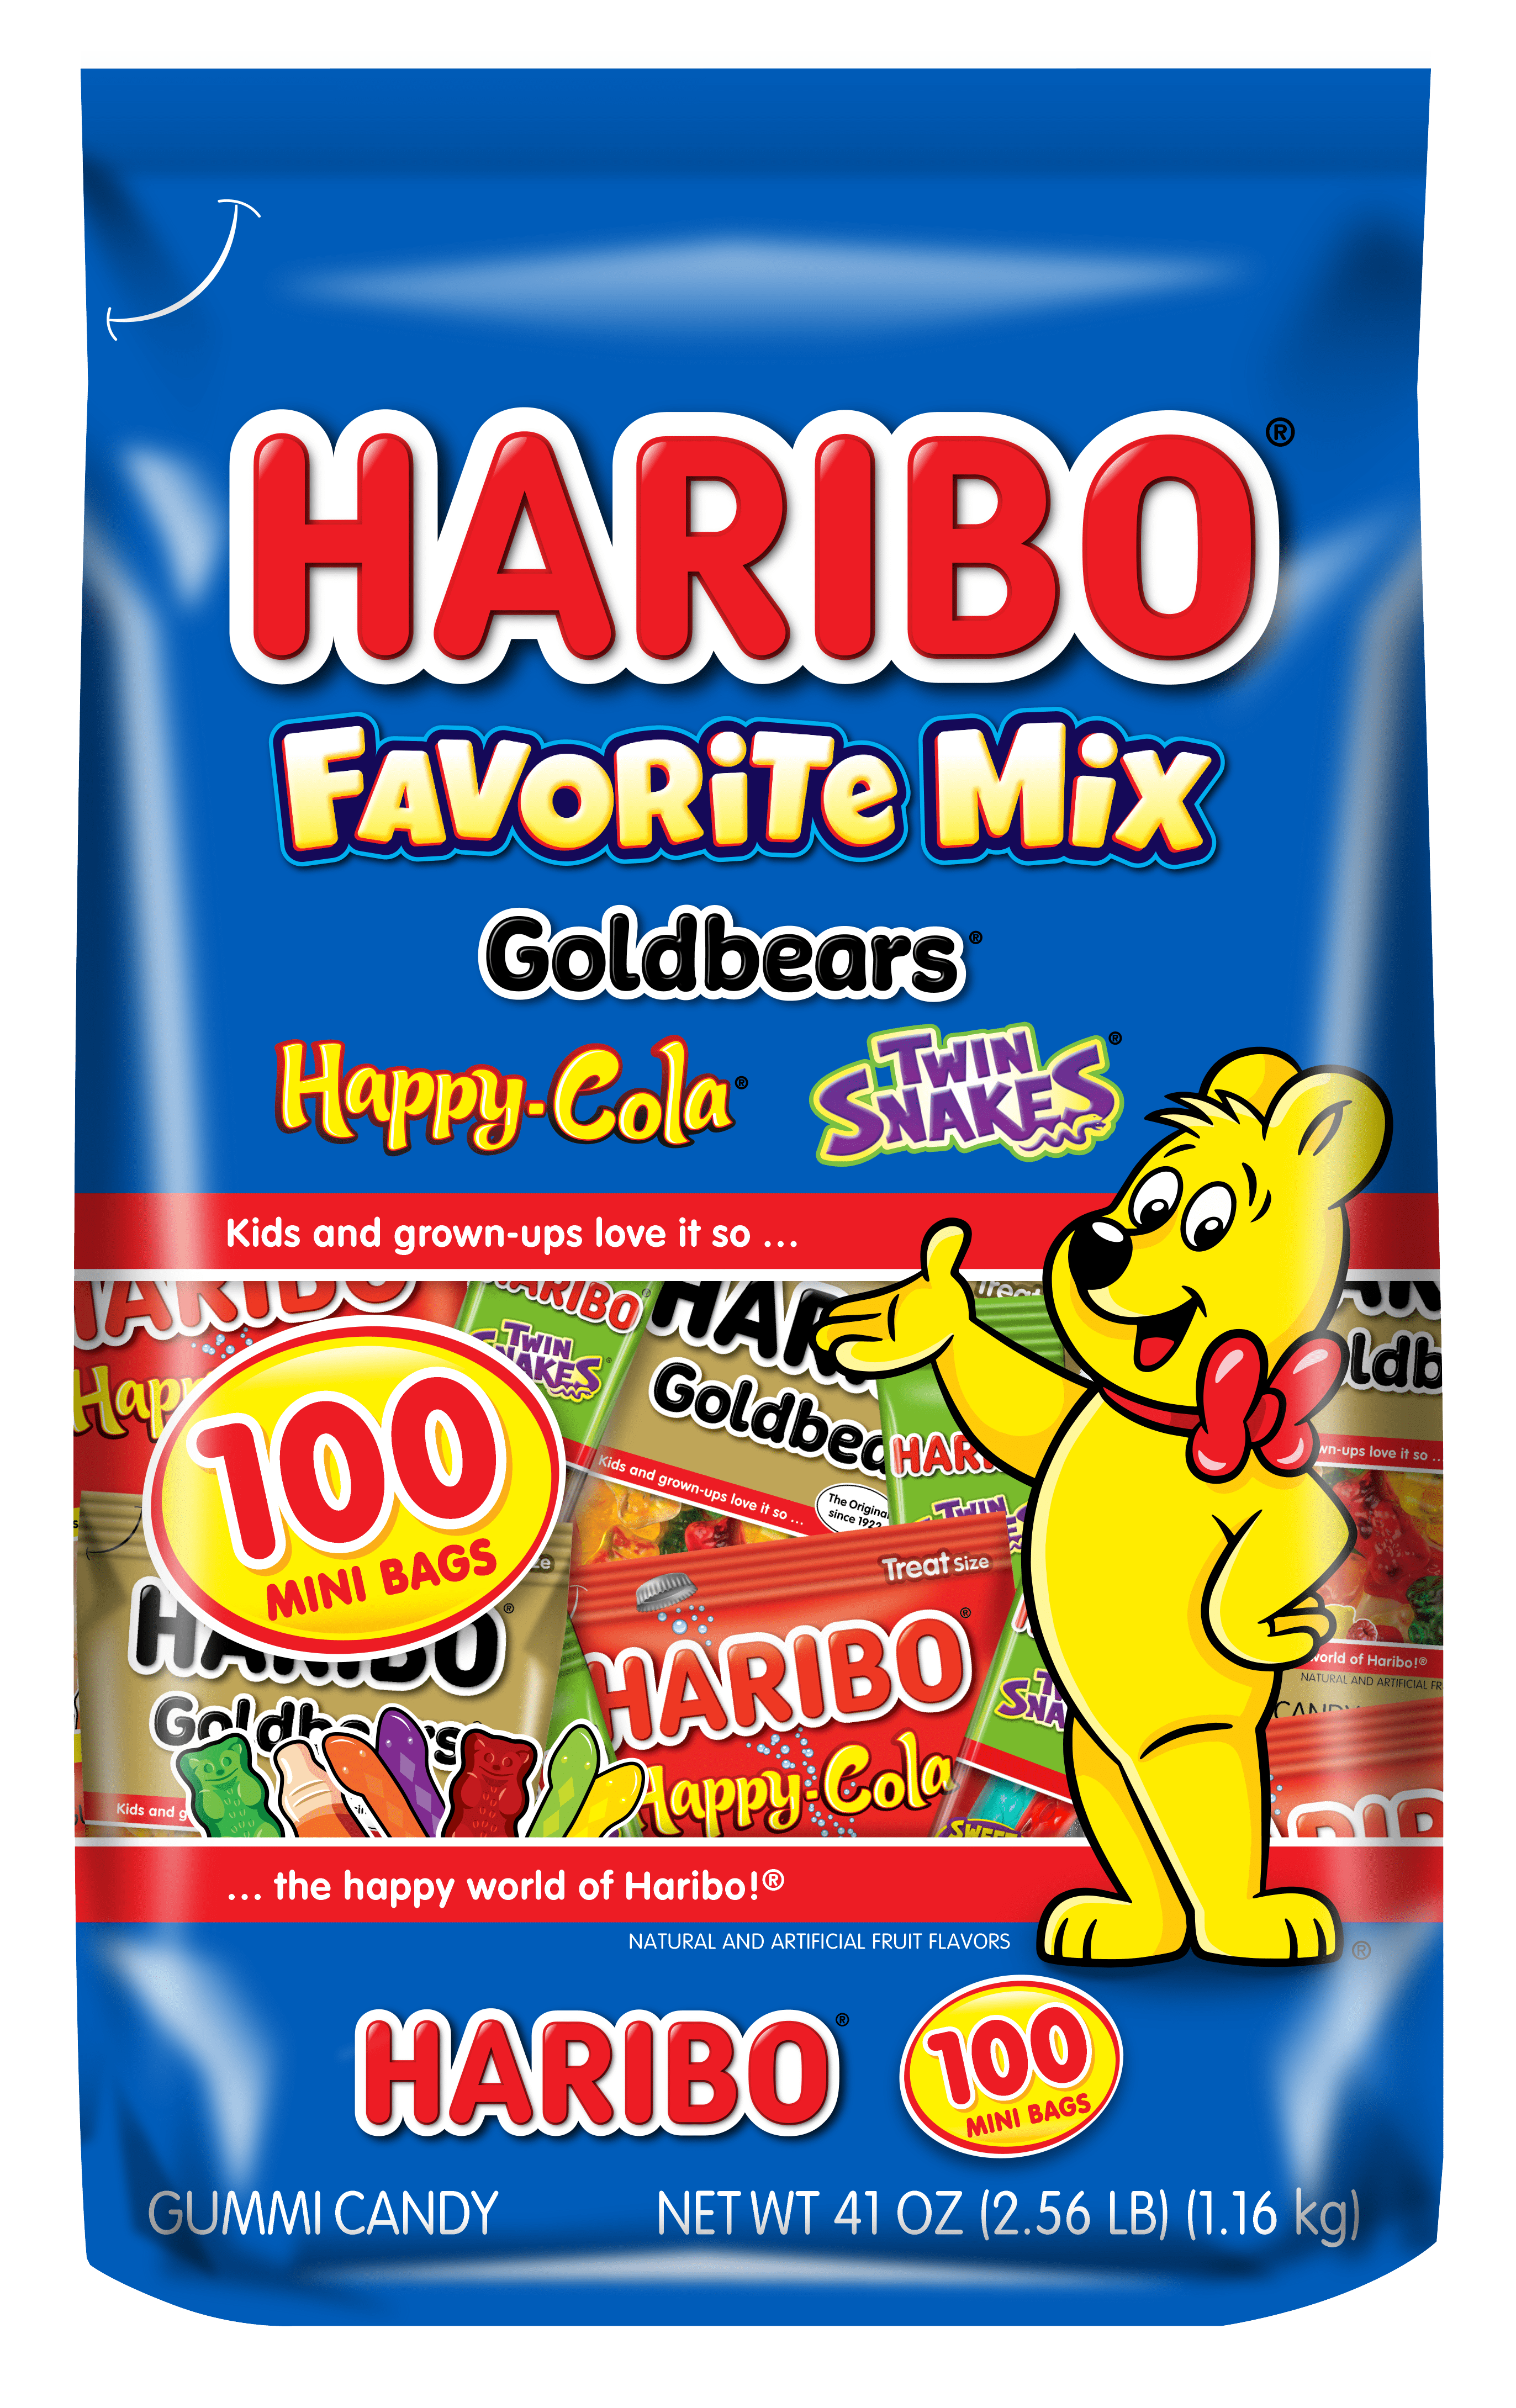 HARIBO Favorite Mix 100ct gummy candy, Pack of 1 41.9oz Stand Up Bag